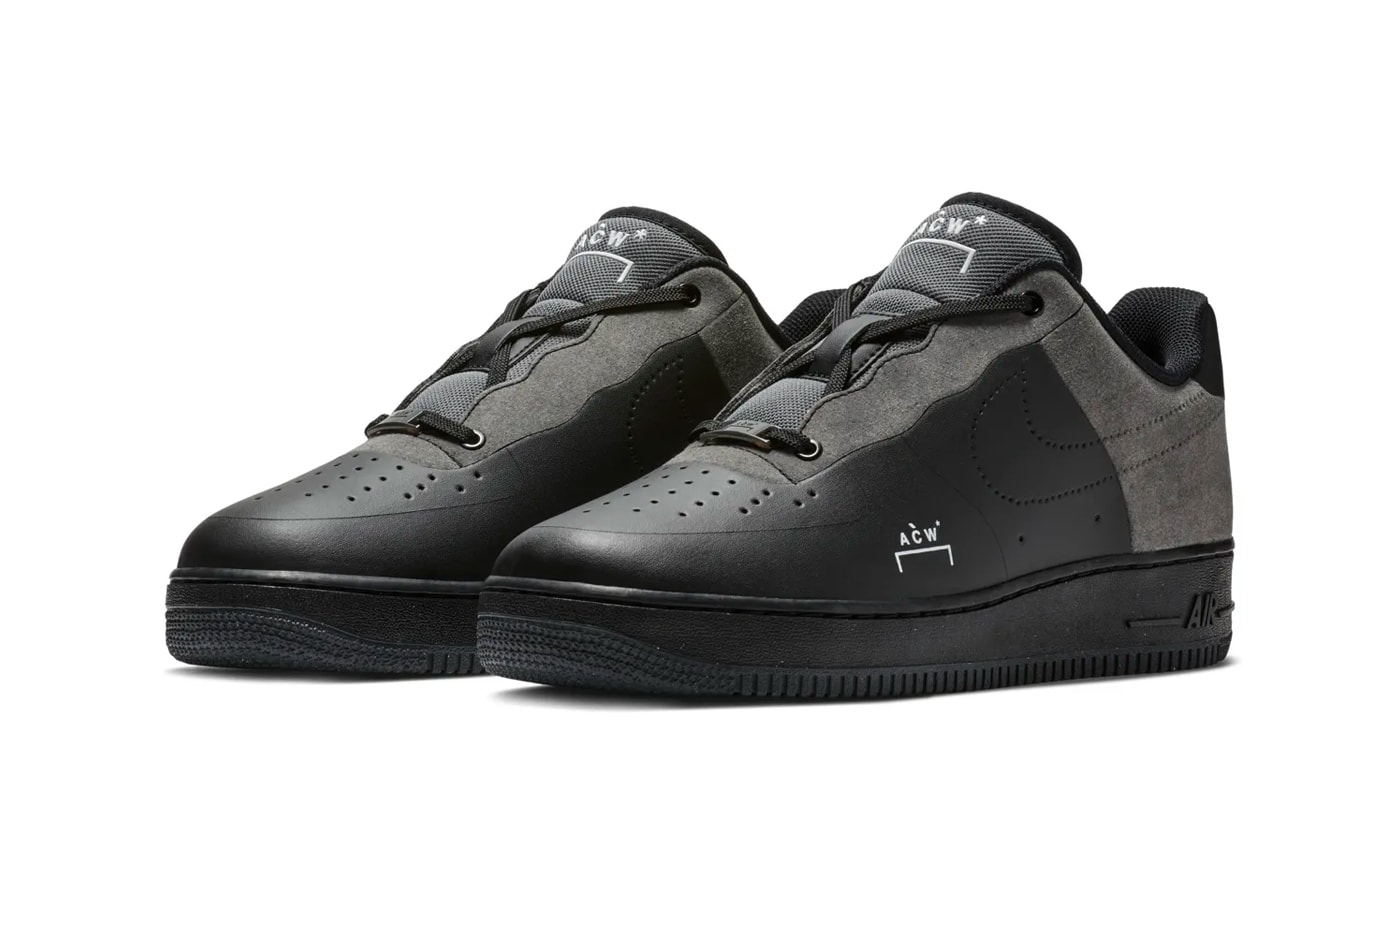 A-COLD-WALL* Nike Air Force 1 Re Release Samuel Ross White Light Grey Black Dark Grey